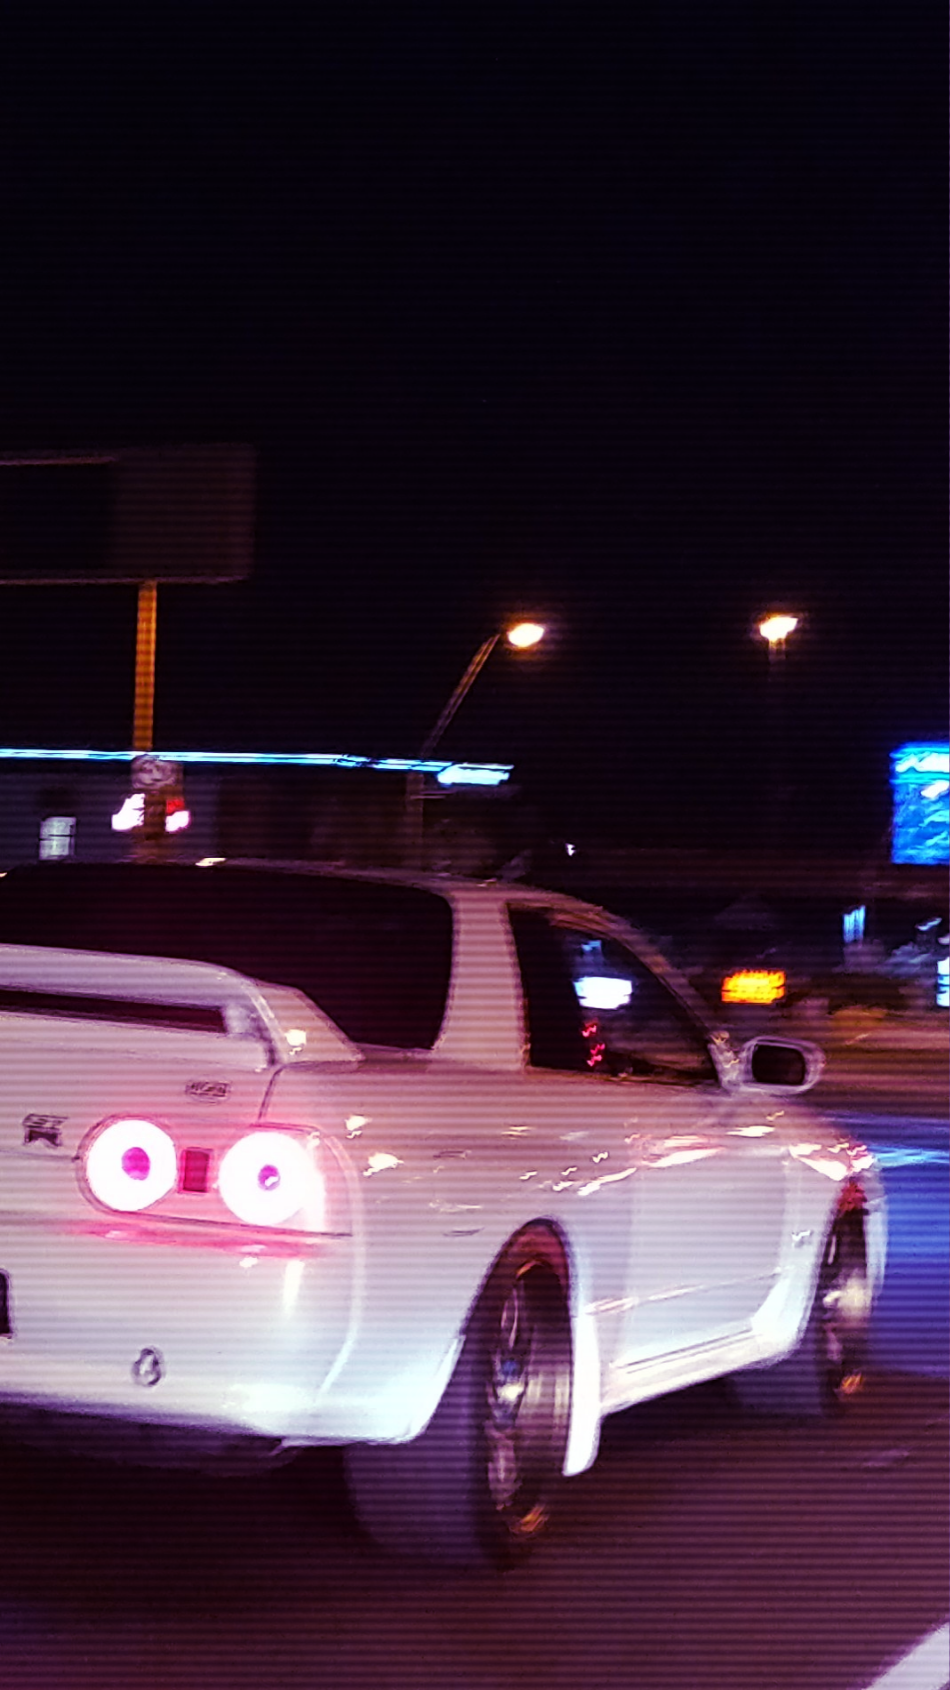 I made this phone wallpaper out of a roller I got of my buddies R32 GTR Nismo. Figured I'd share!